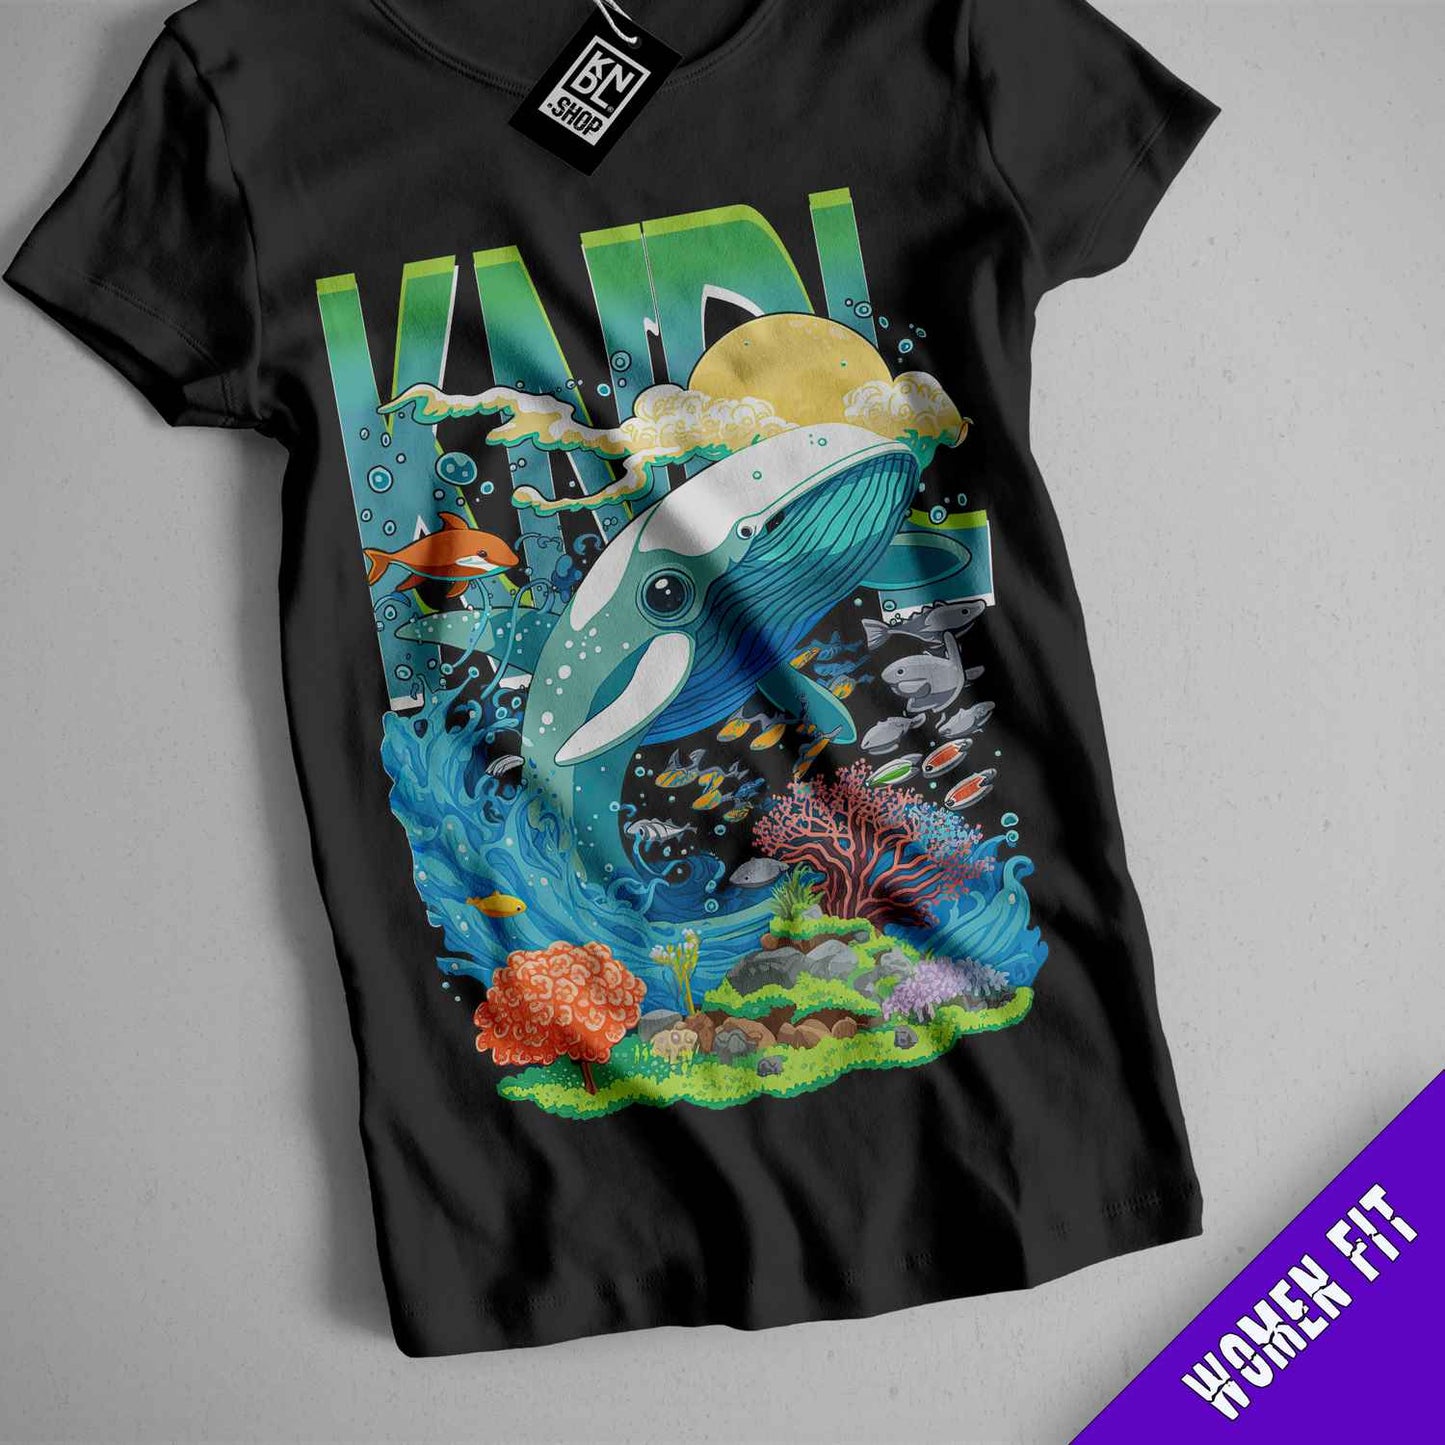 a t - shirt with a picture of a whale and fish